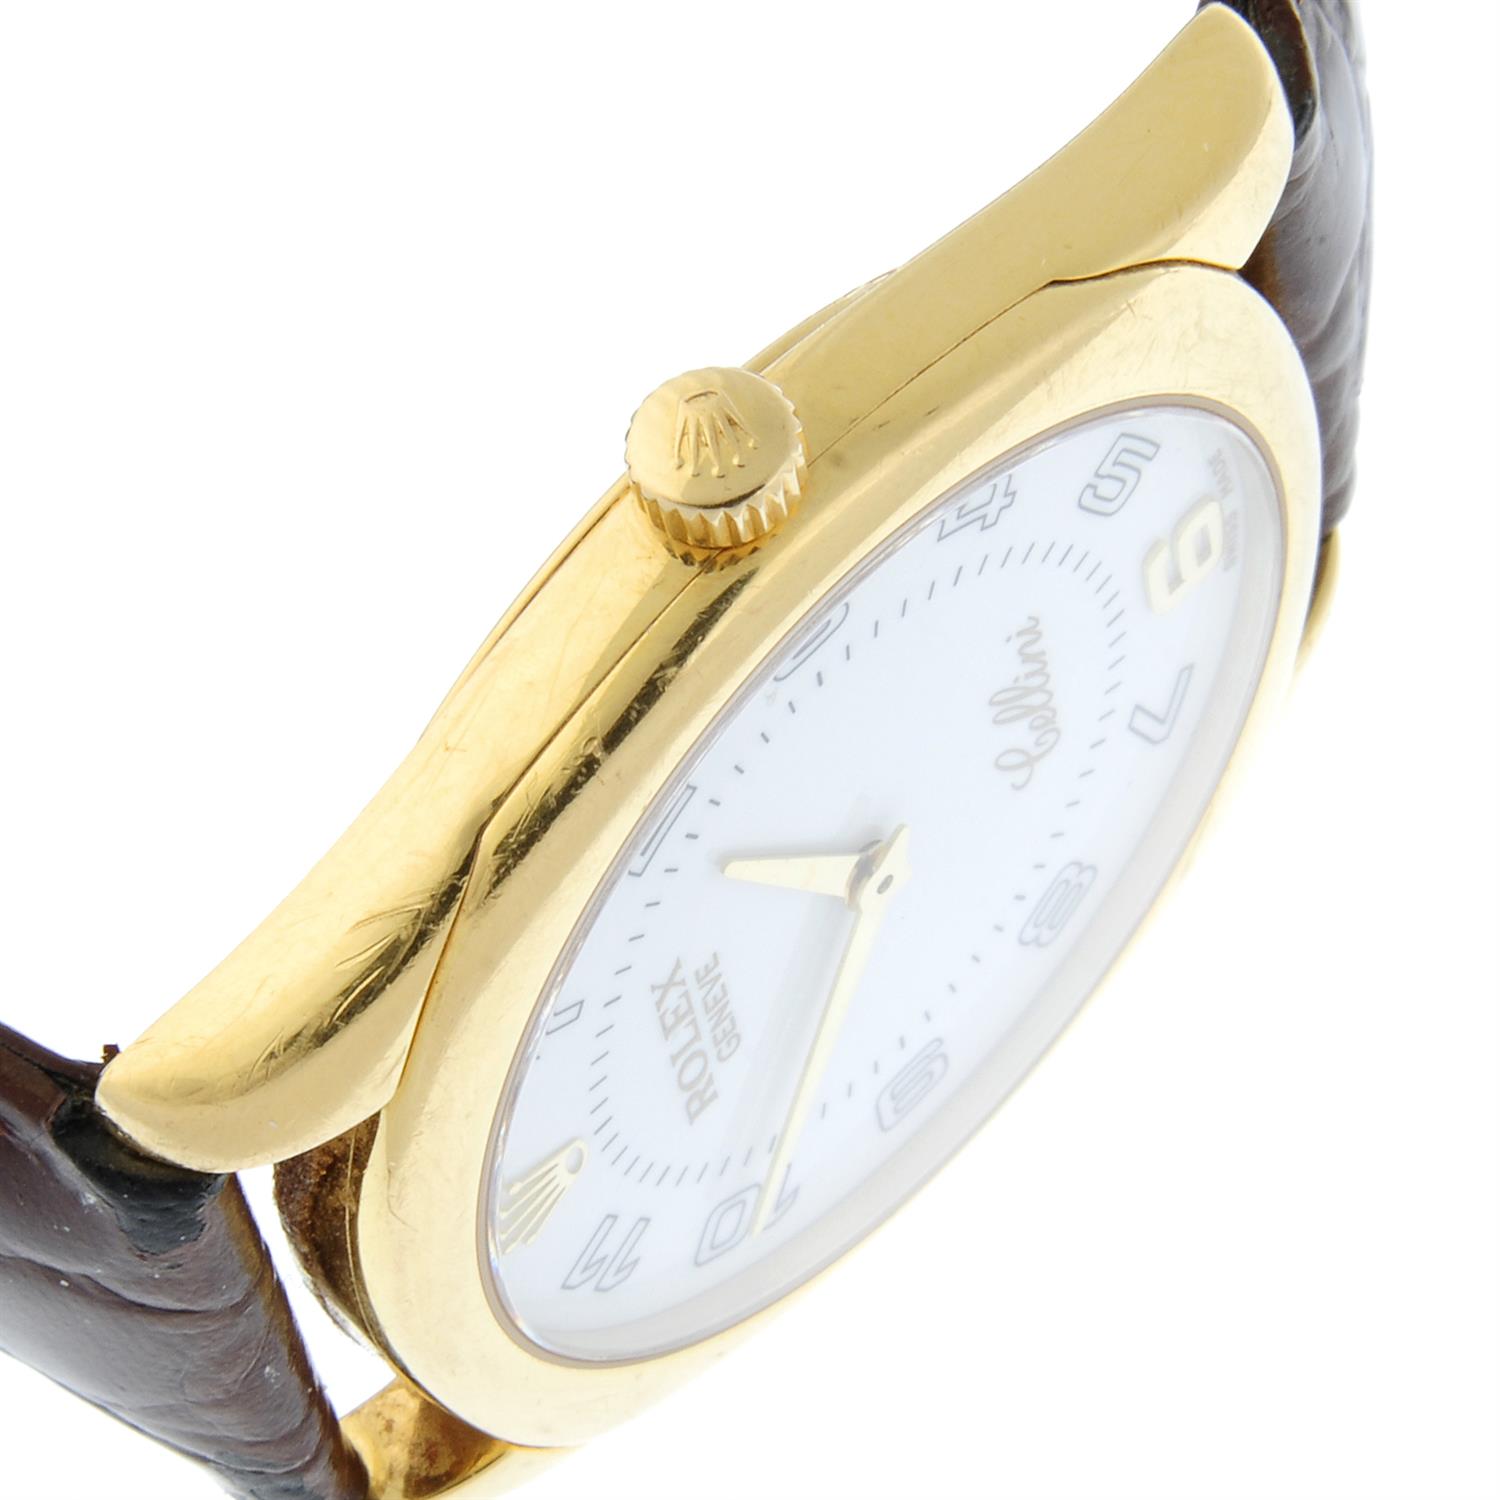 Rolex - a Cellini watch, 33mm. - Image 3 of 4